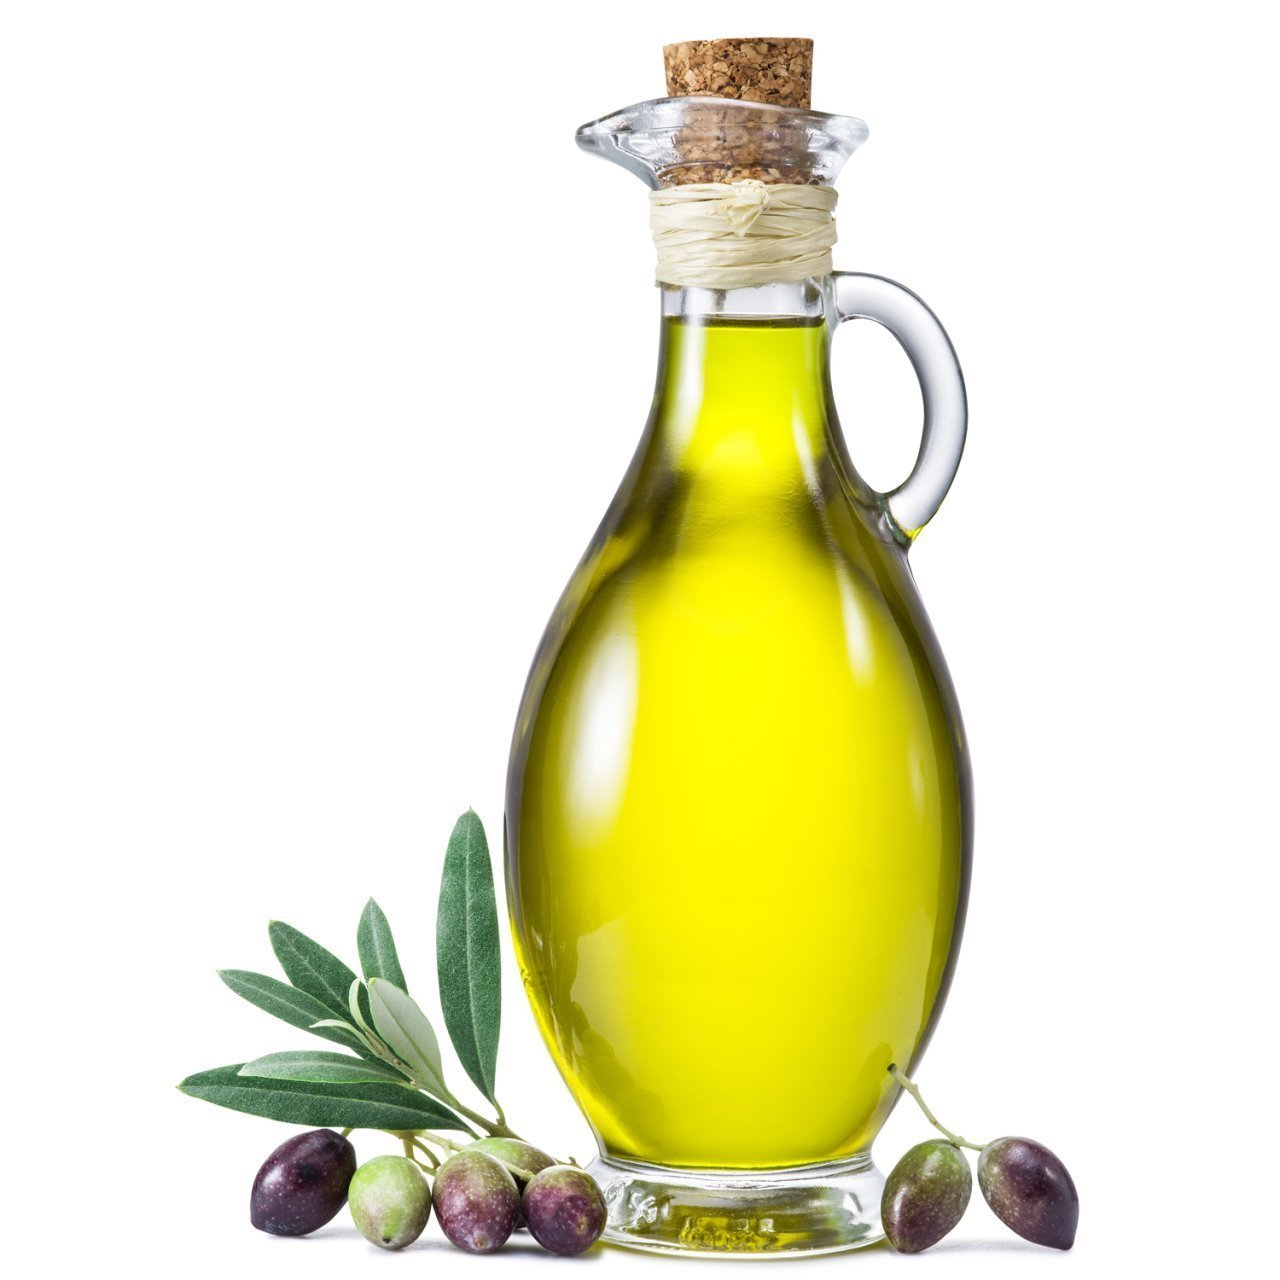 Extra Virgin Olive Oil - Extra Virgin Olive Oil Prices - Olive Oil Prices